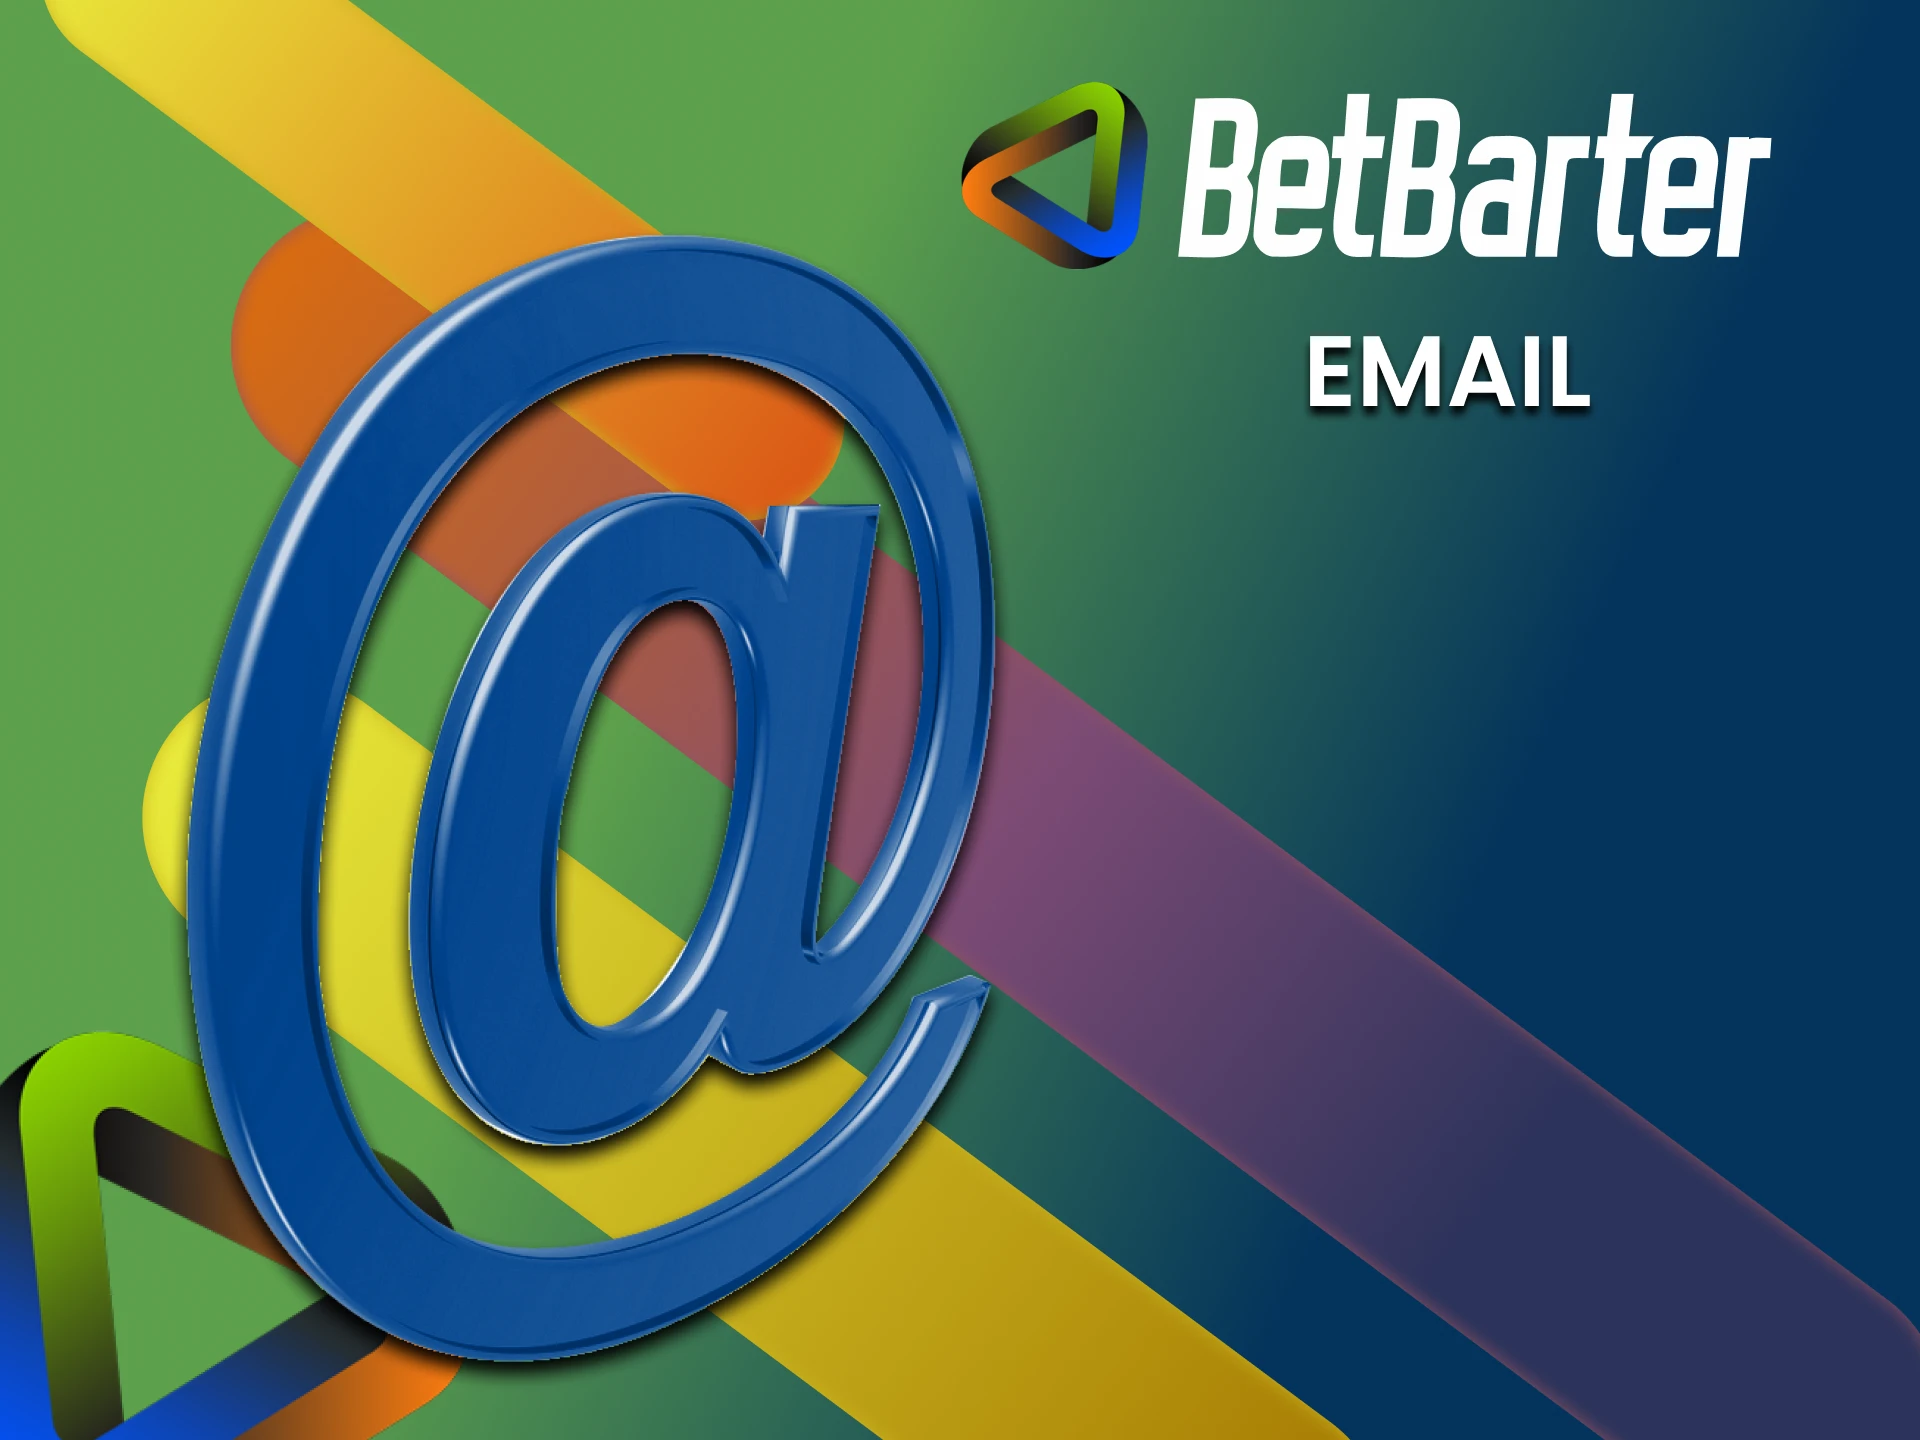 You can contact the BetBarter support team via email.